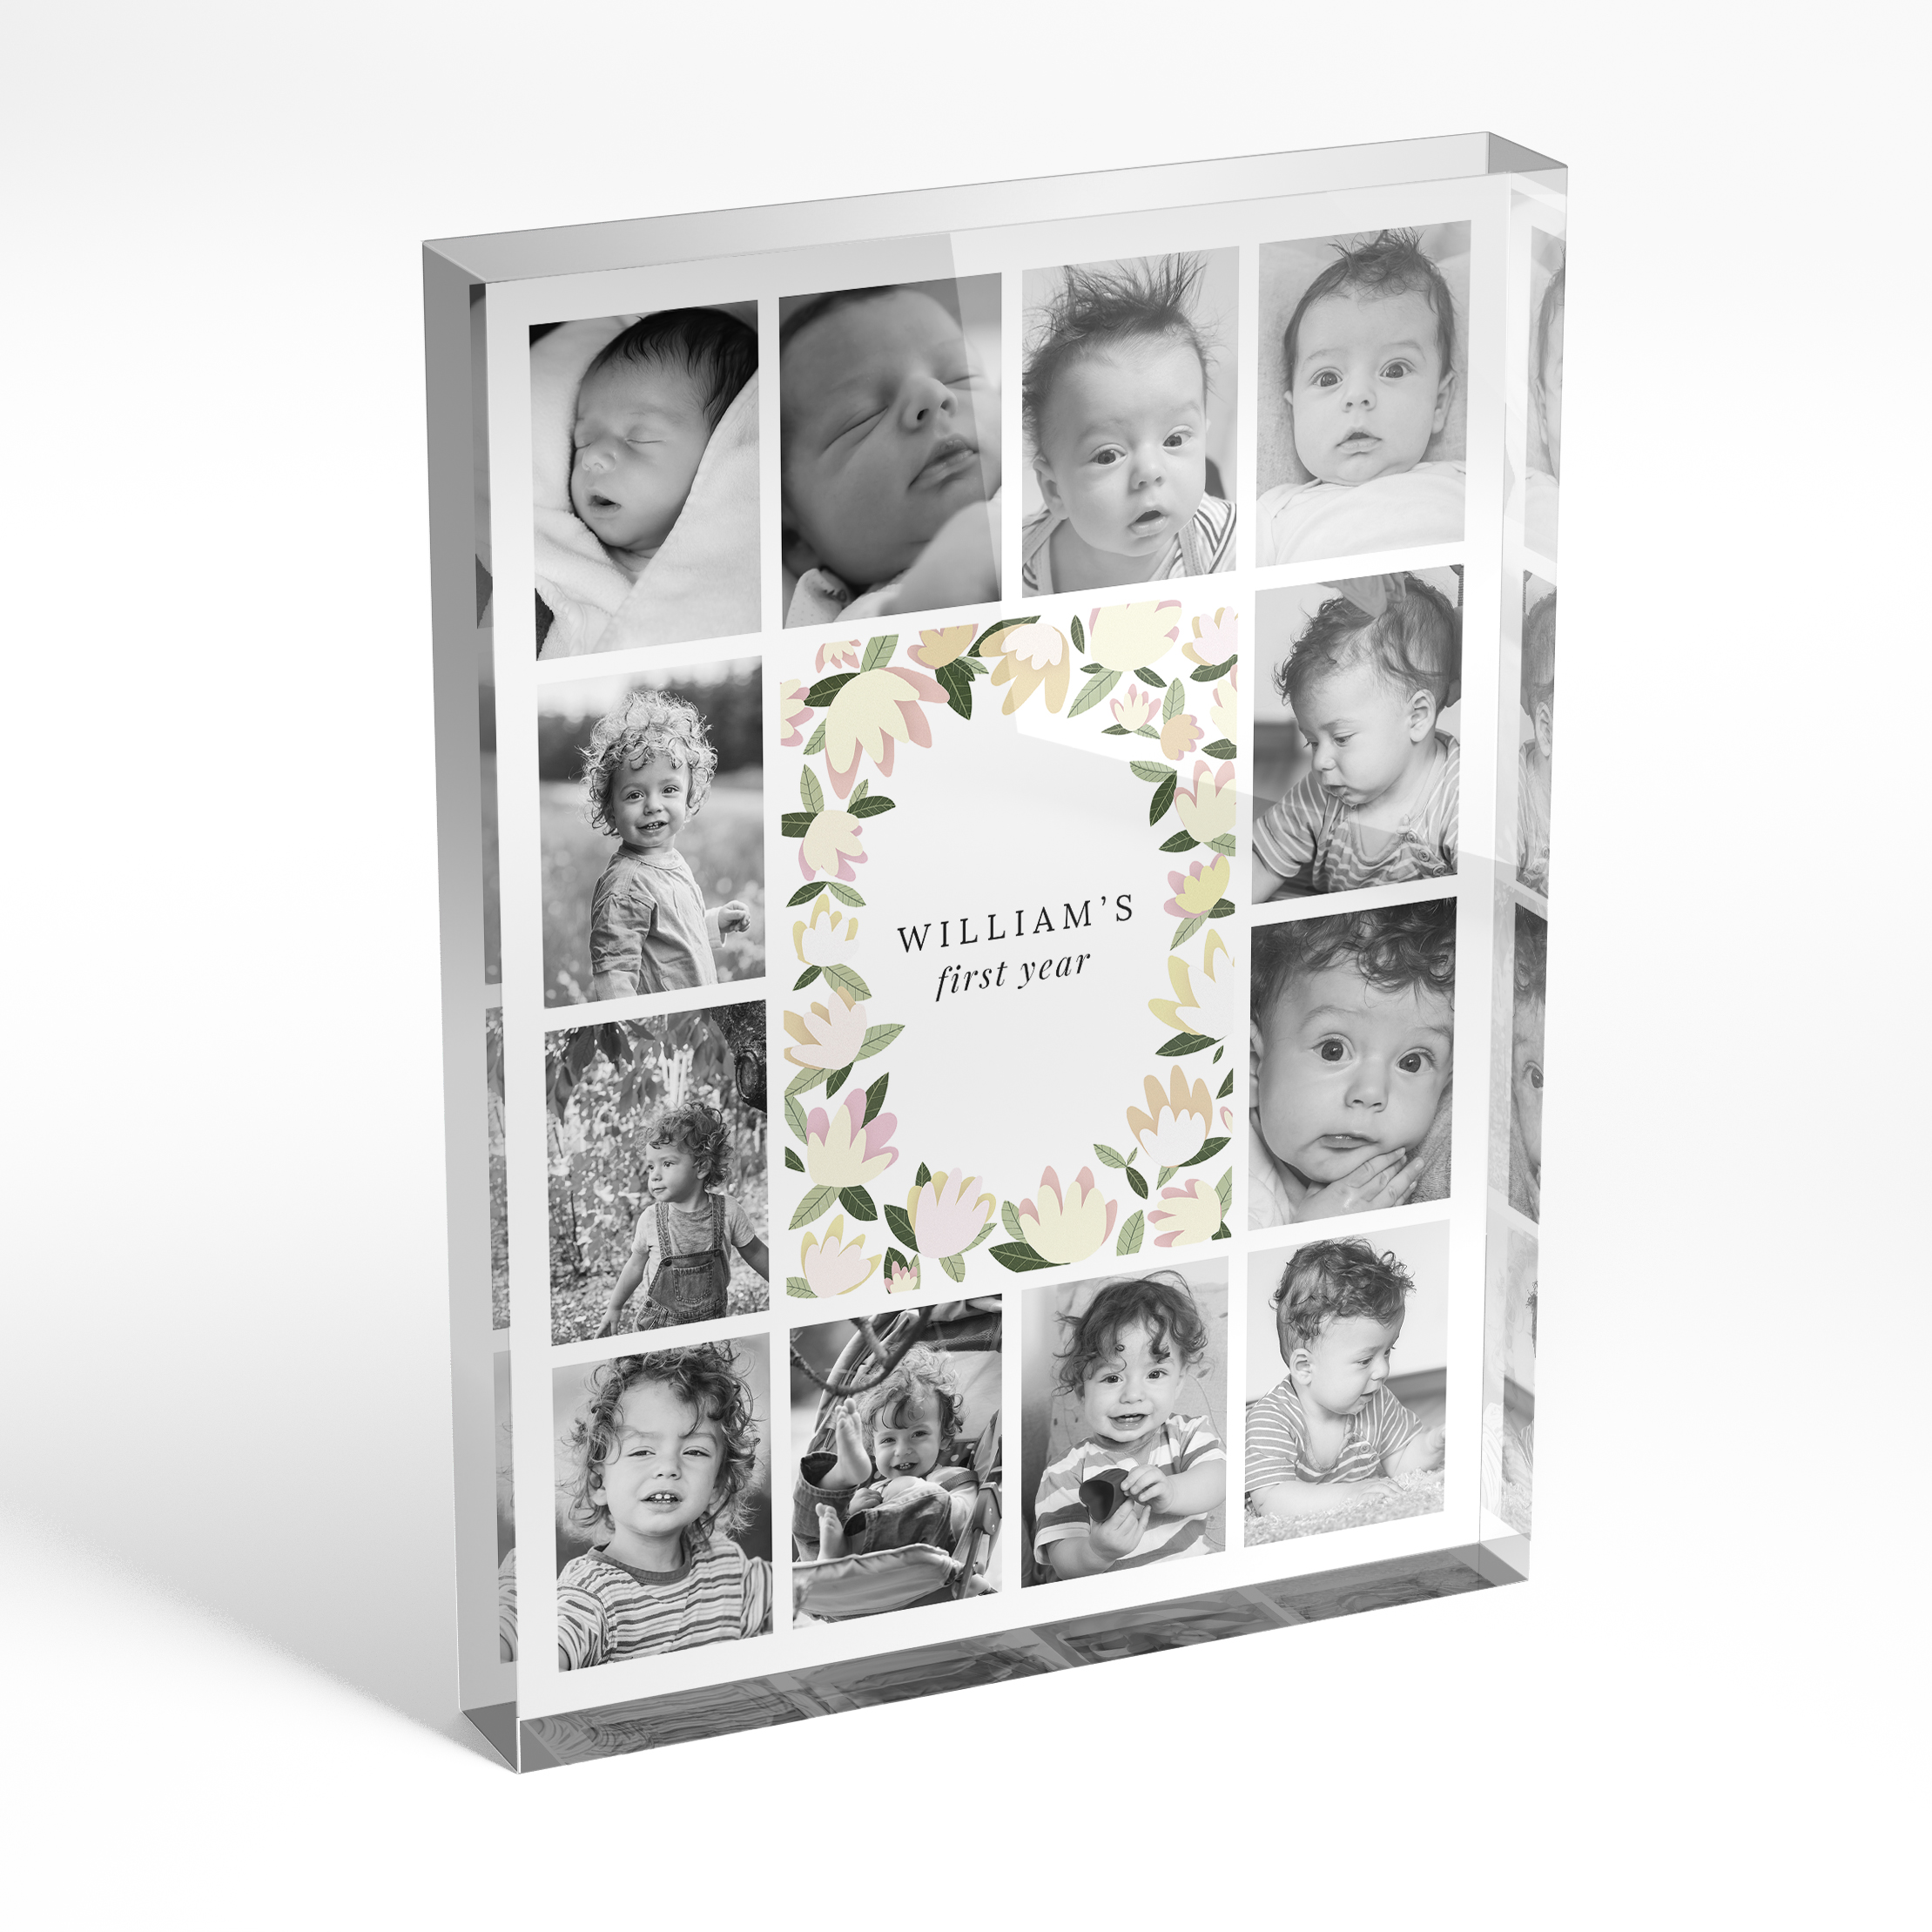 An angled side view of a portrait layout Acrylic Photo Block with space for 10+ photos. Thiis design is named "My first year". 